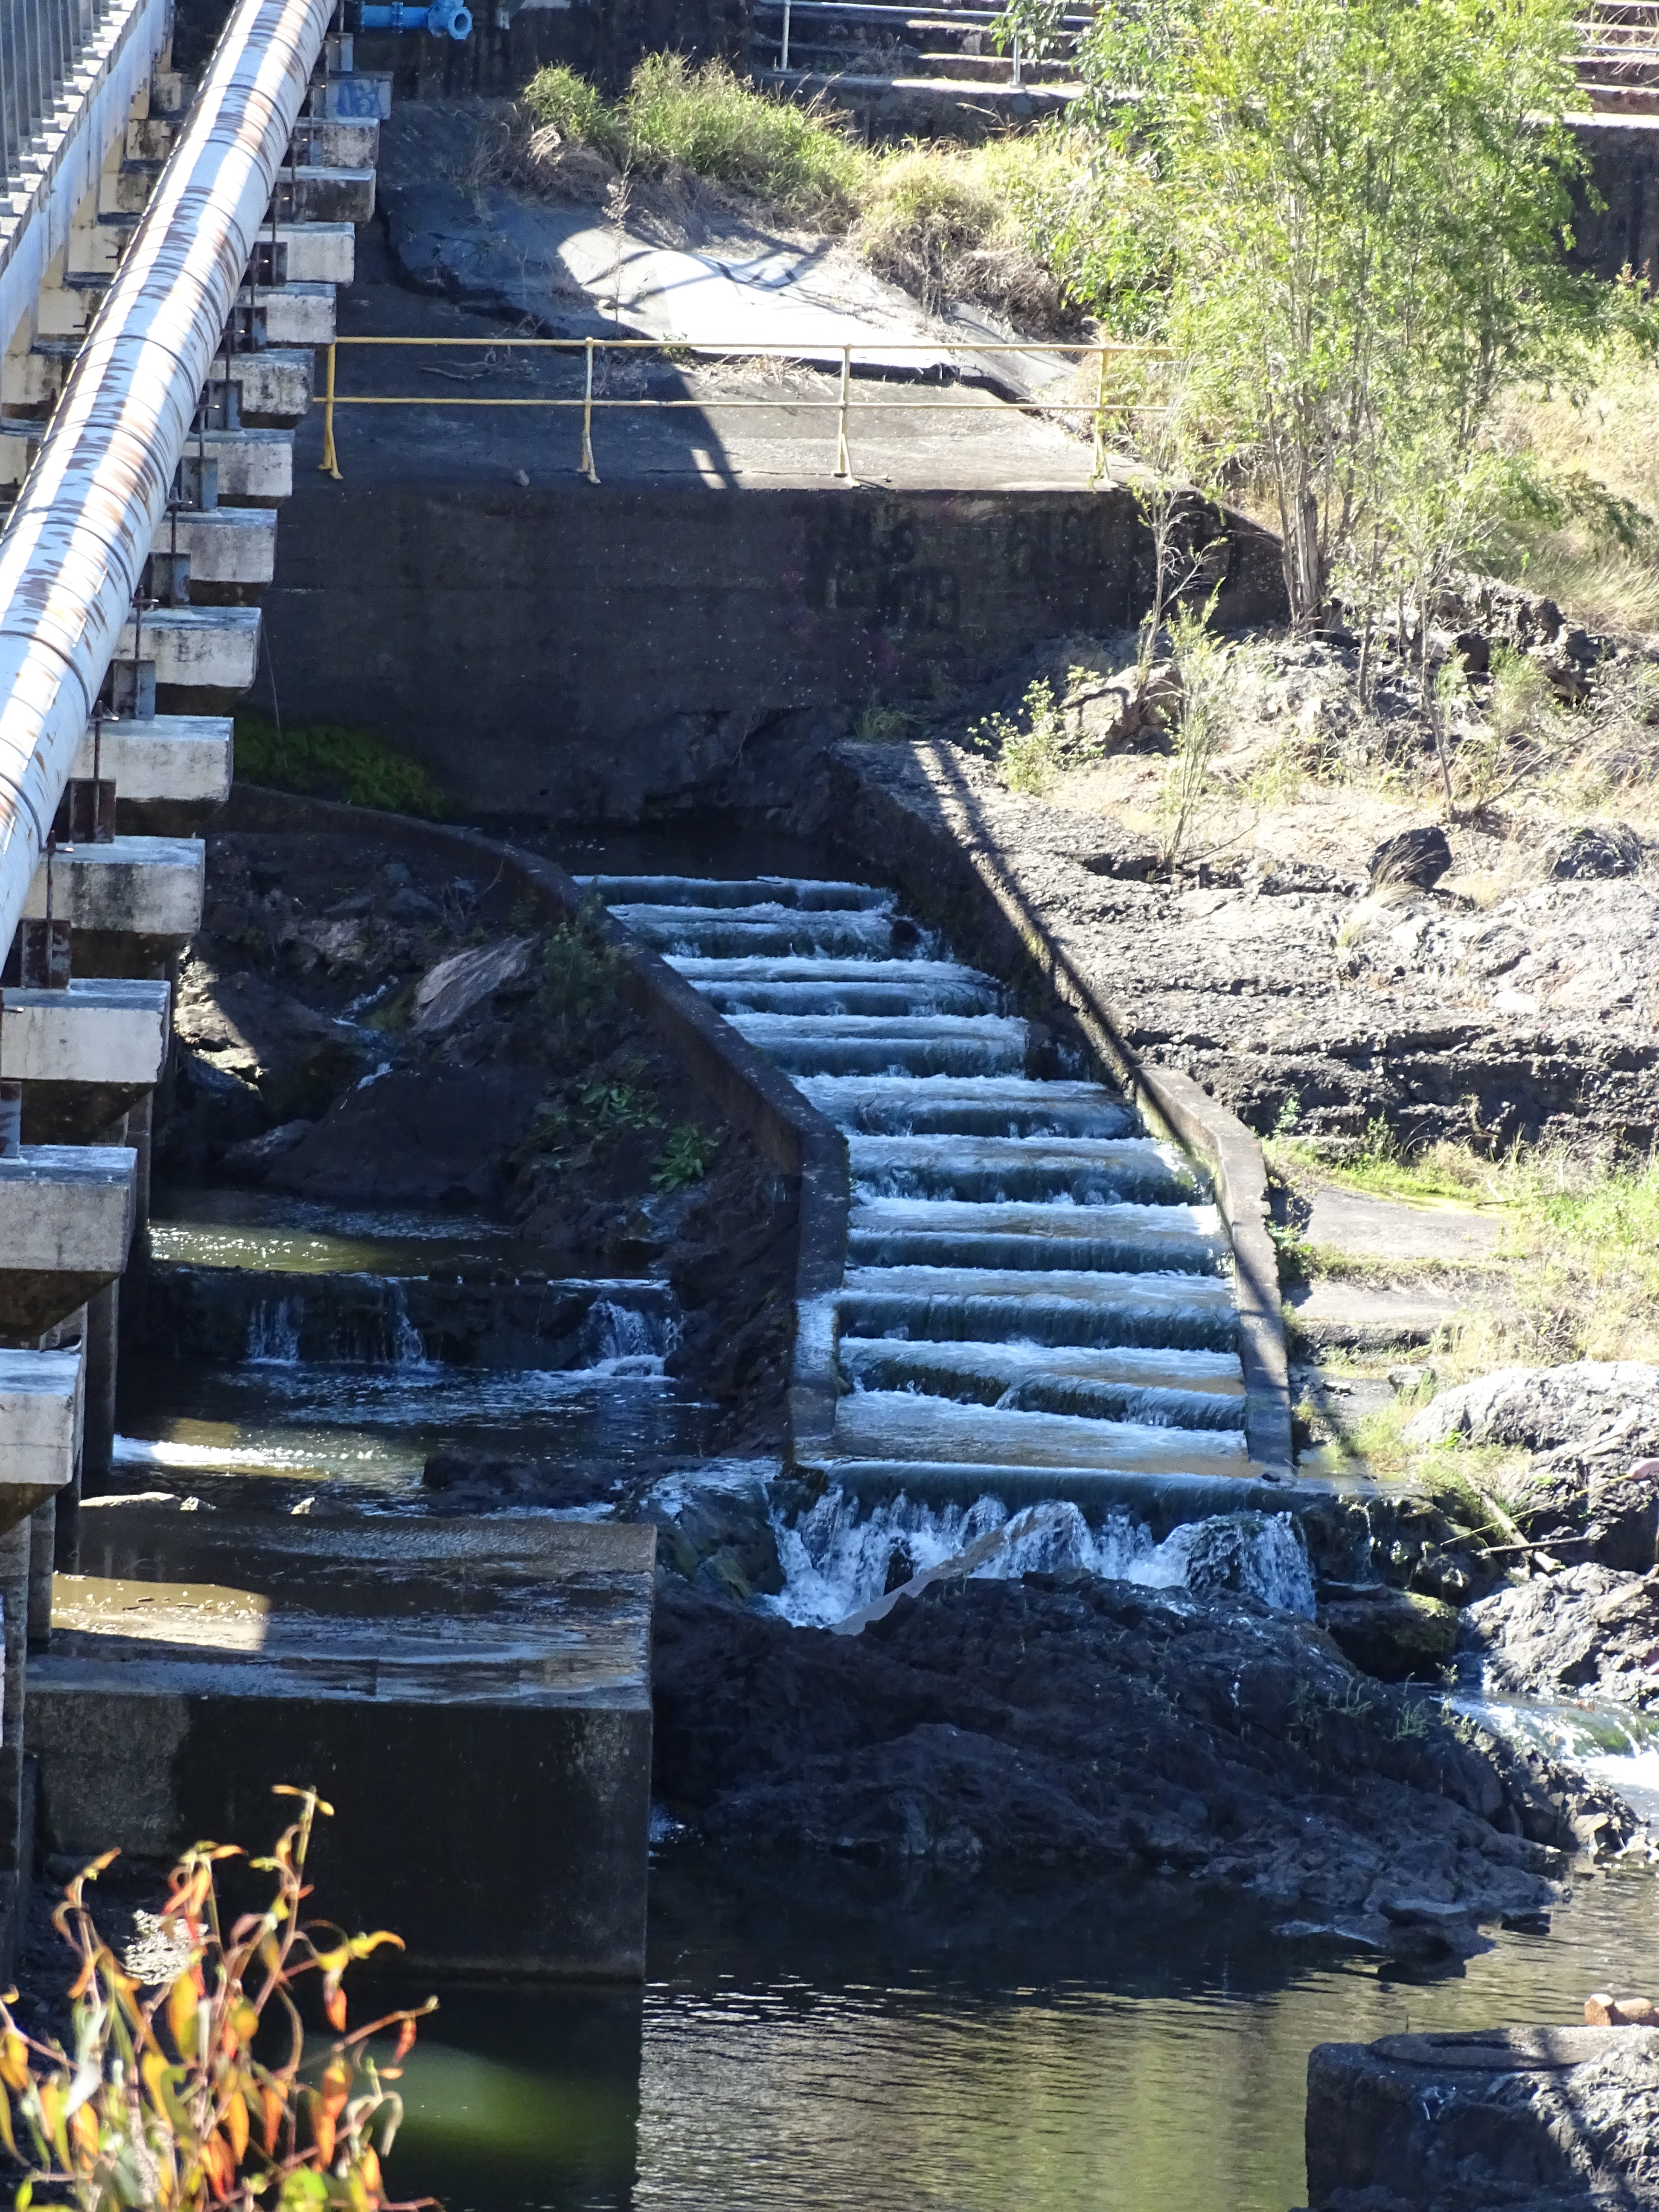 This is an image of the Fish Ladder, part of the local heritage place known as the Mt Crosby Weir & Old Bridge Foundations.